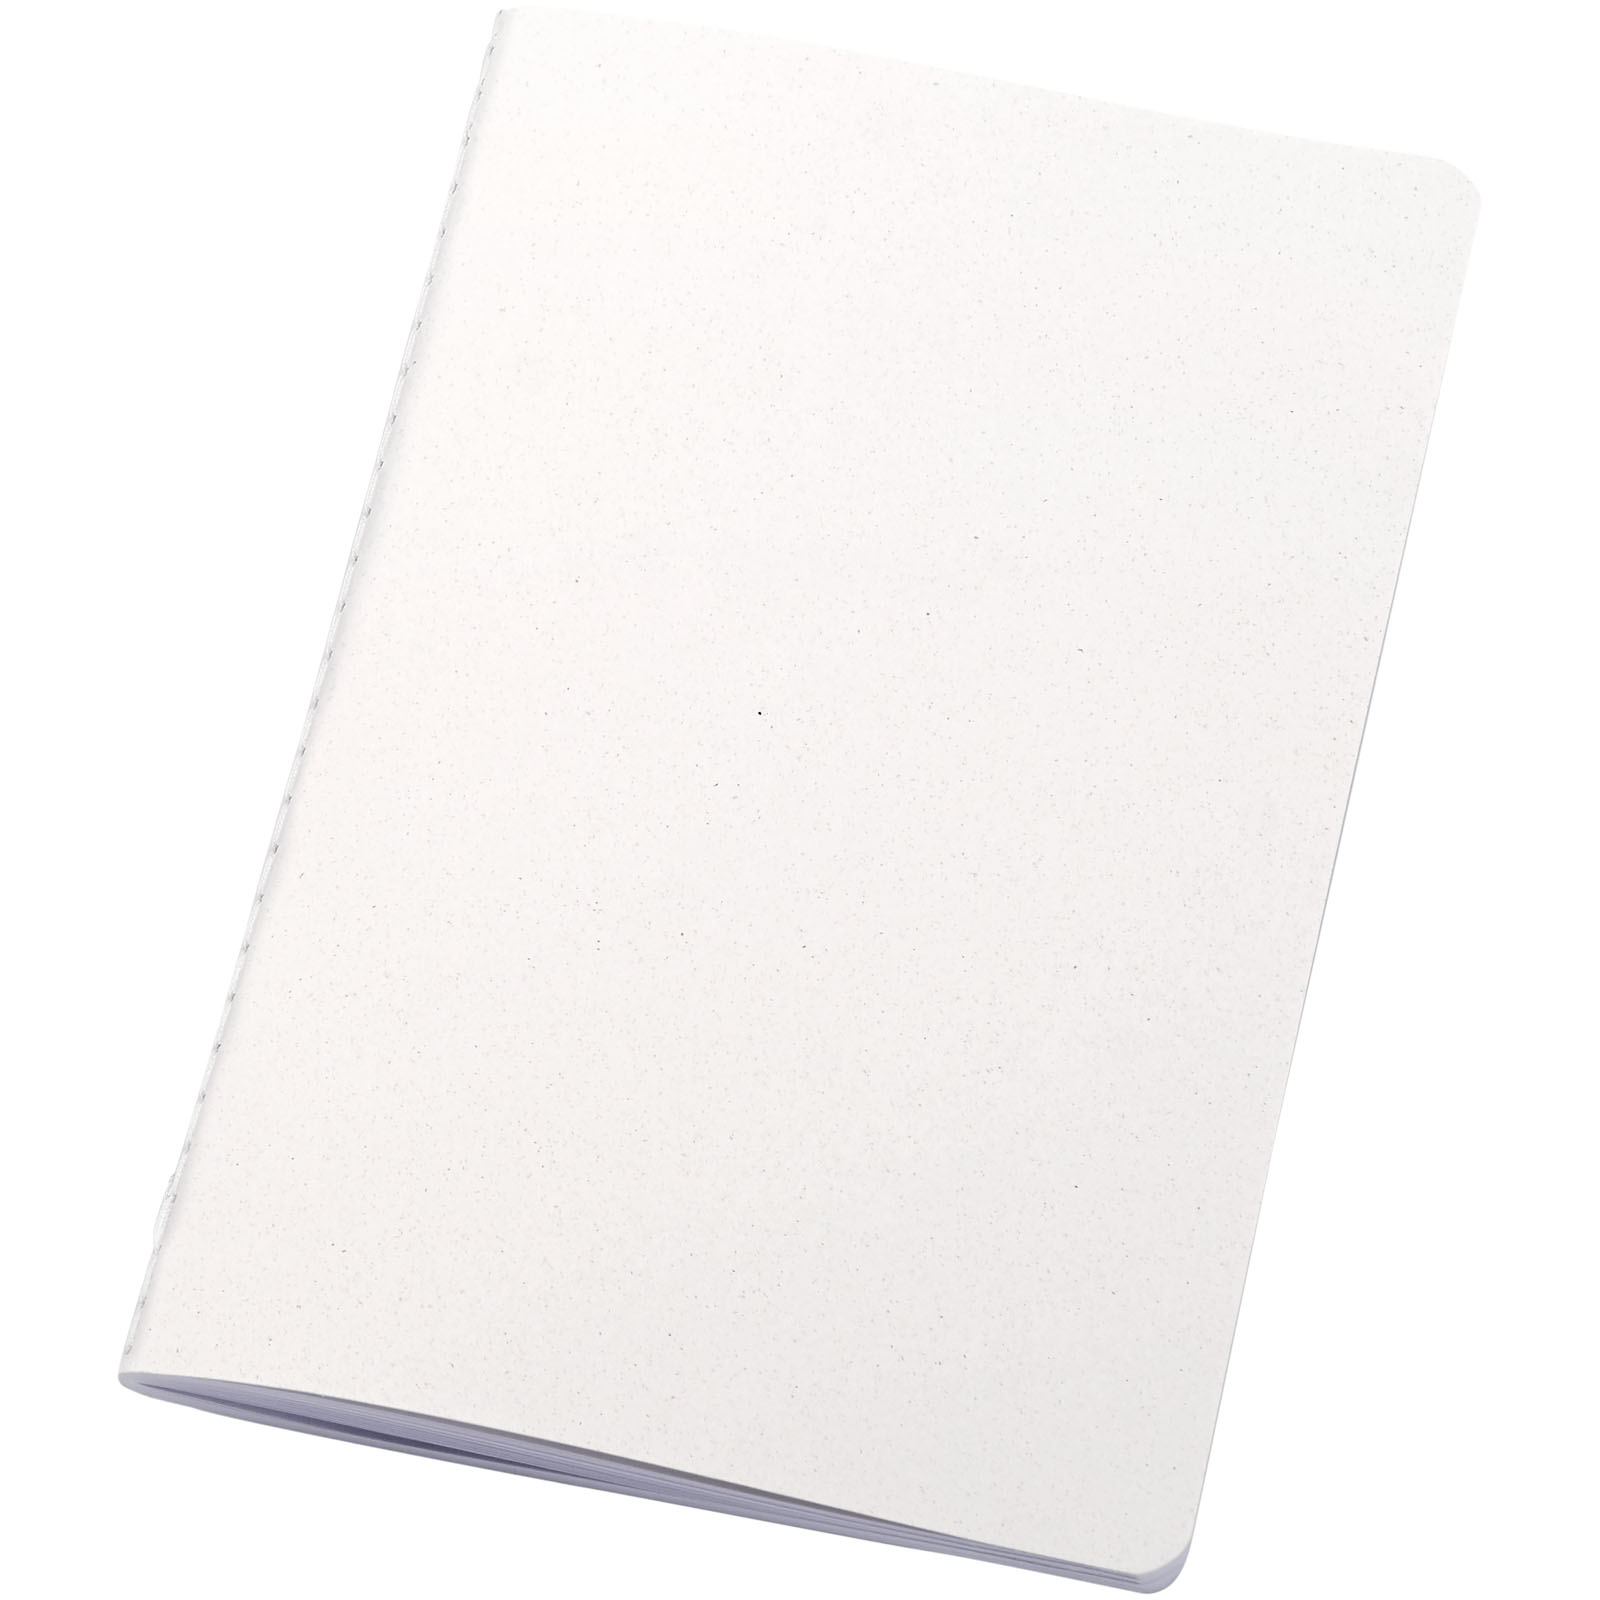 Paper Products - Fabia crush paper cover notebook